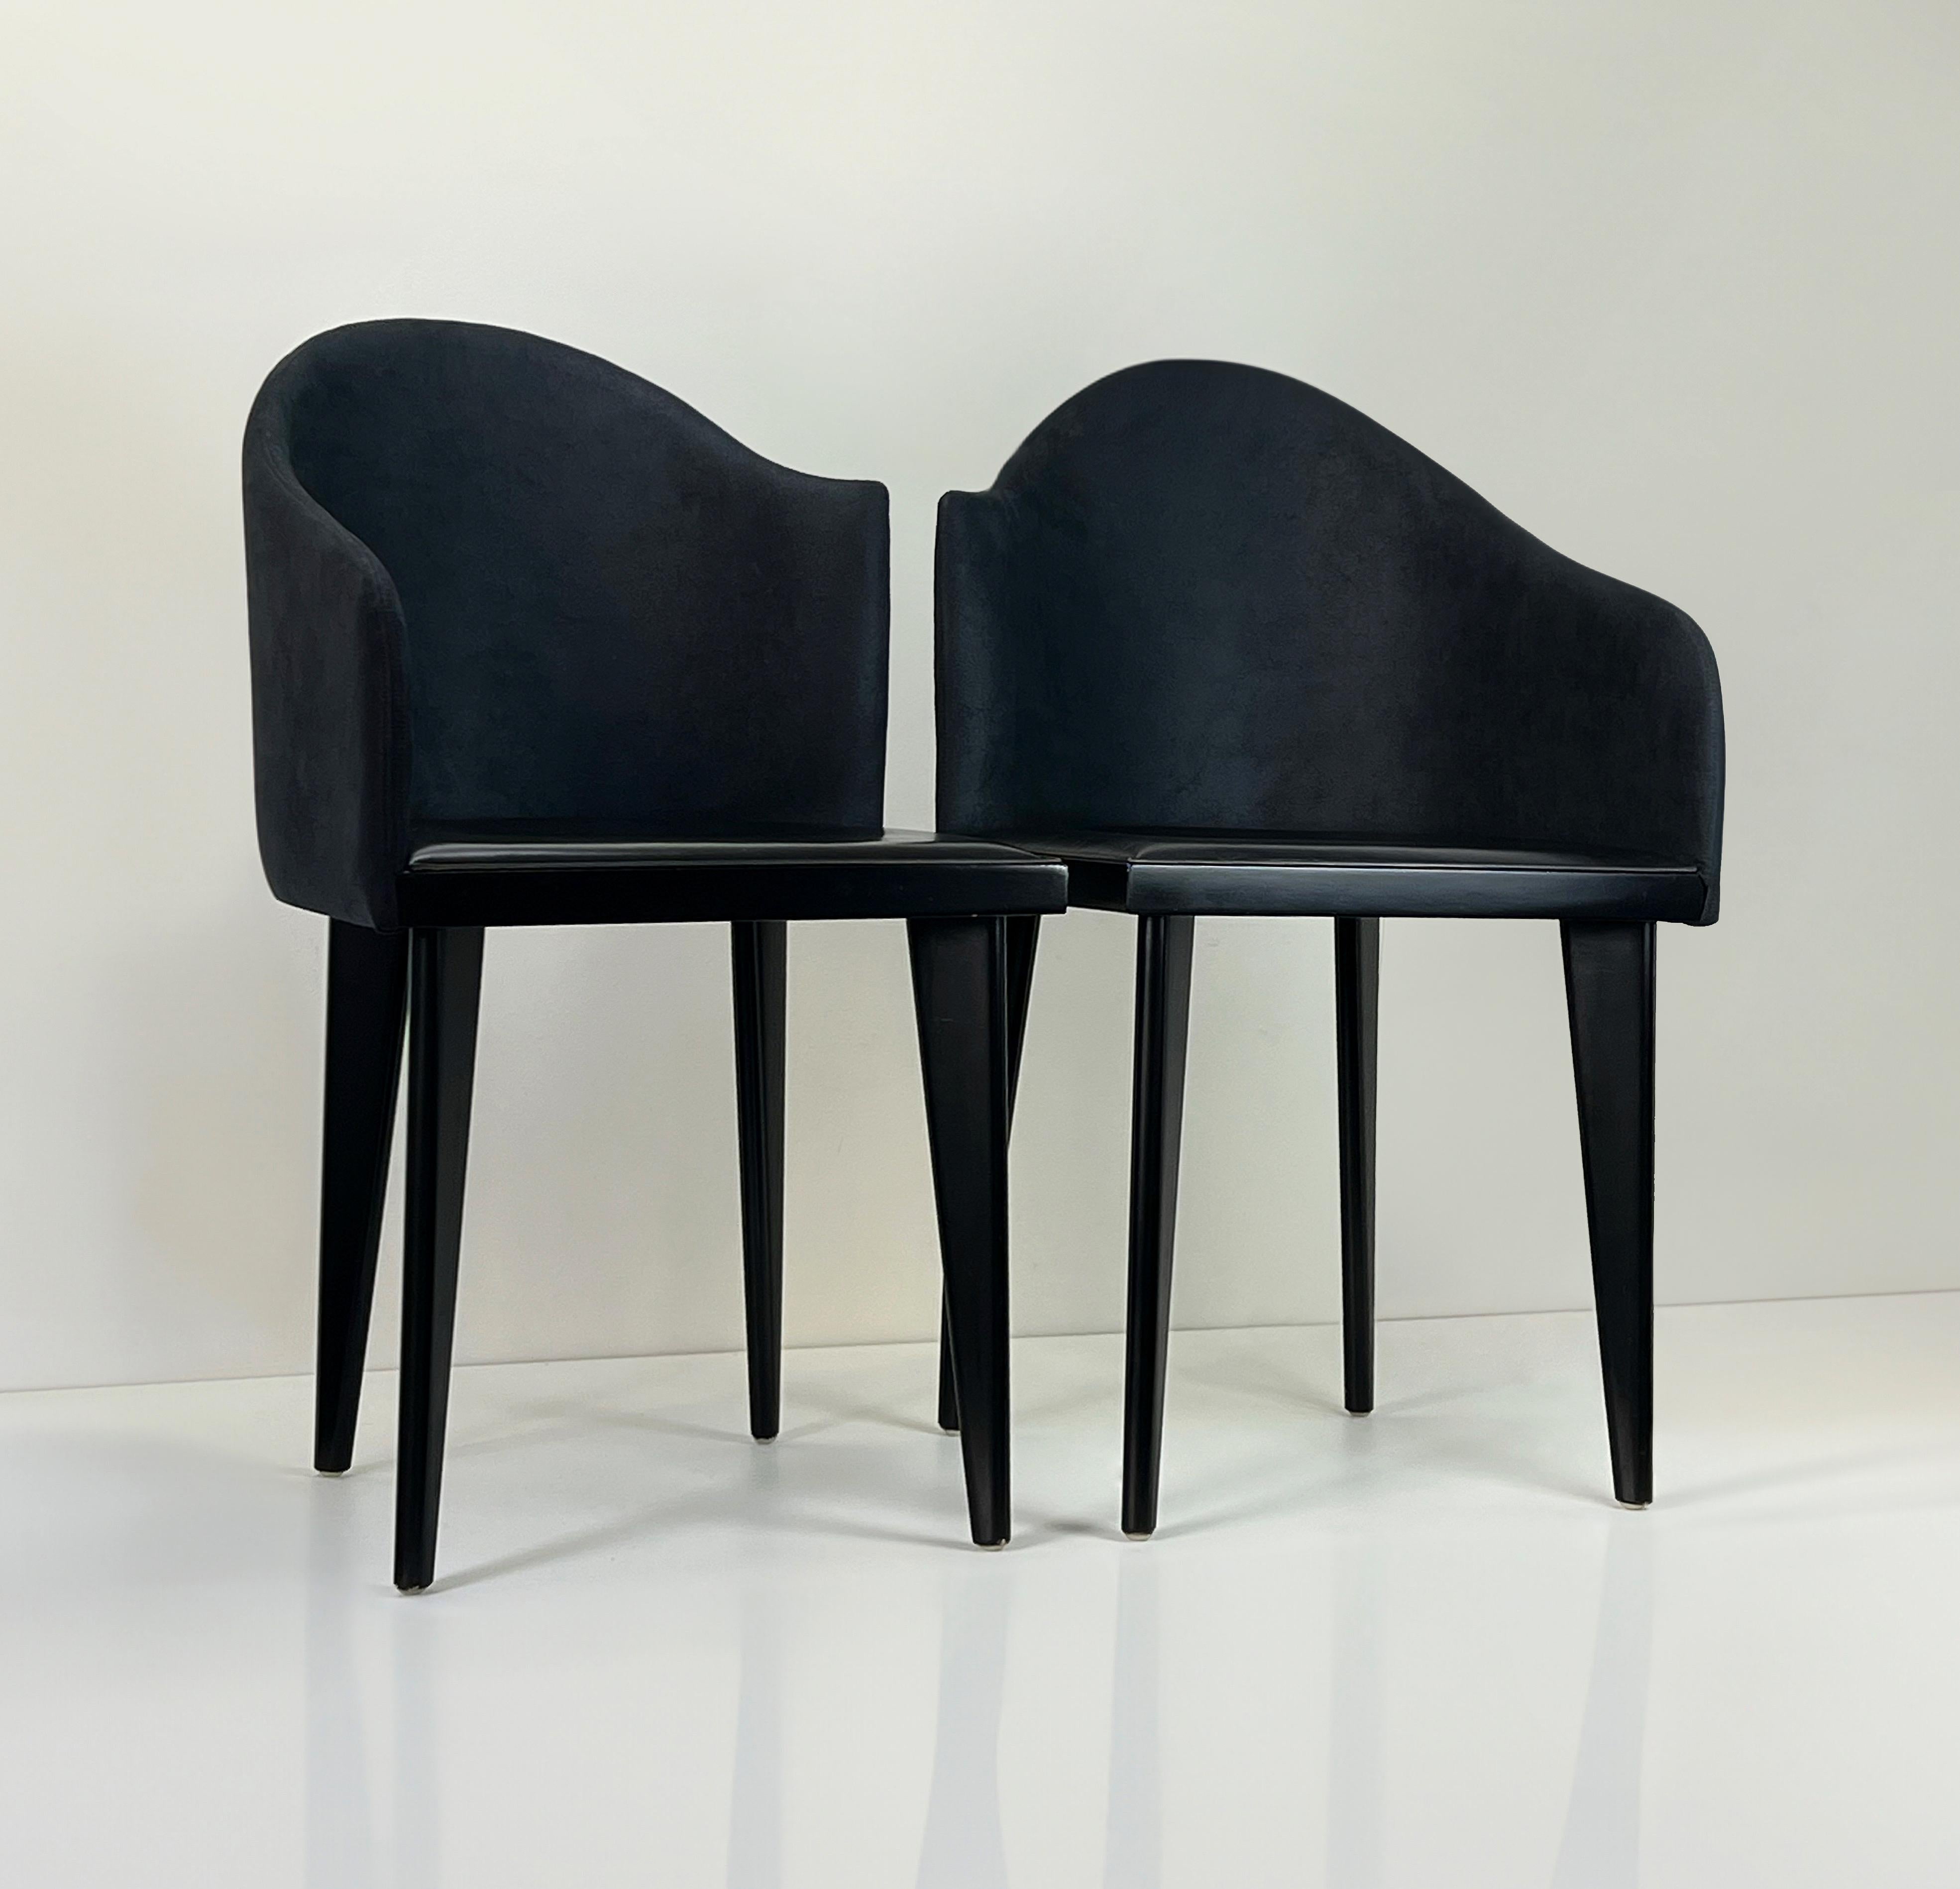 The Toscana chairs by Saporiti are renowned for their elegant design and exceptional craftsmanship. Saporiti is an Italian furniture company known for its high-quality and contemporary designs, and the Toscana chairs are a testament to their